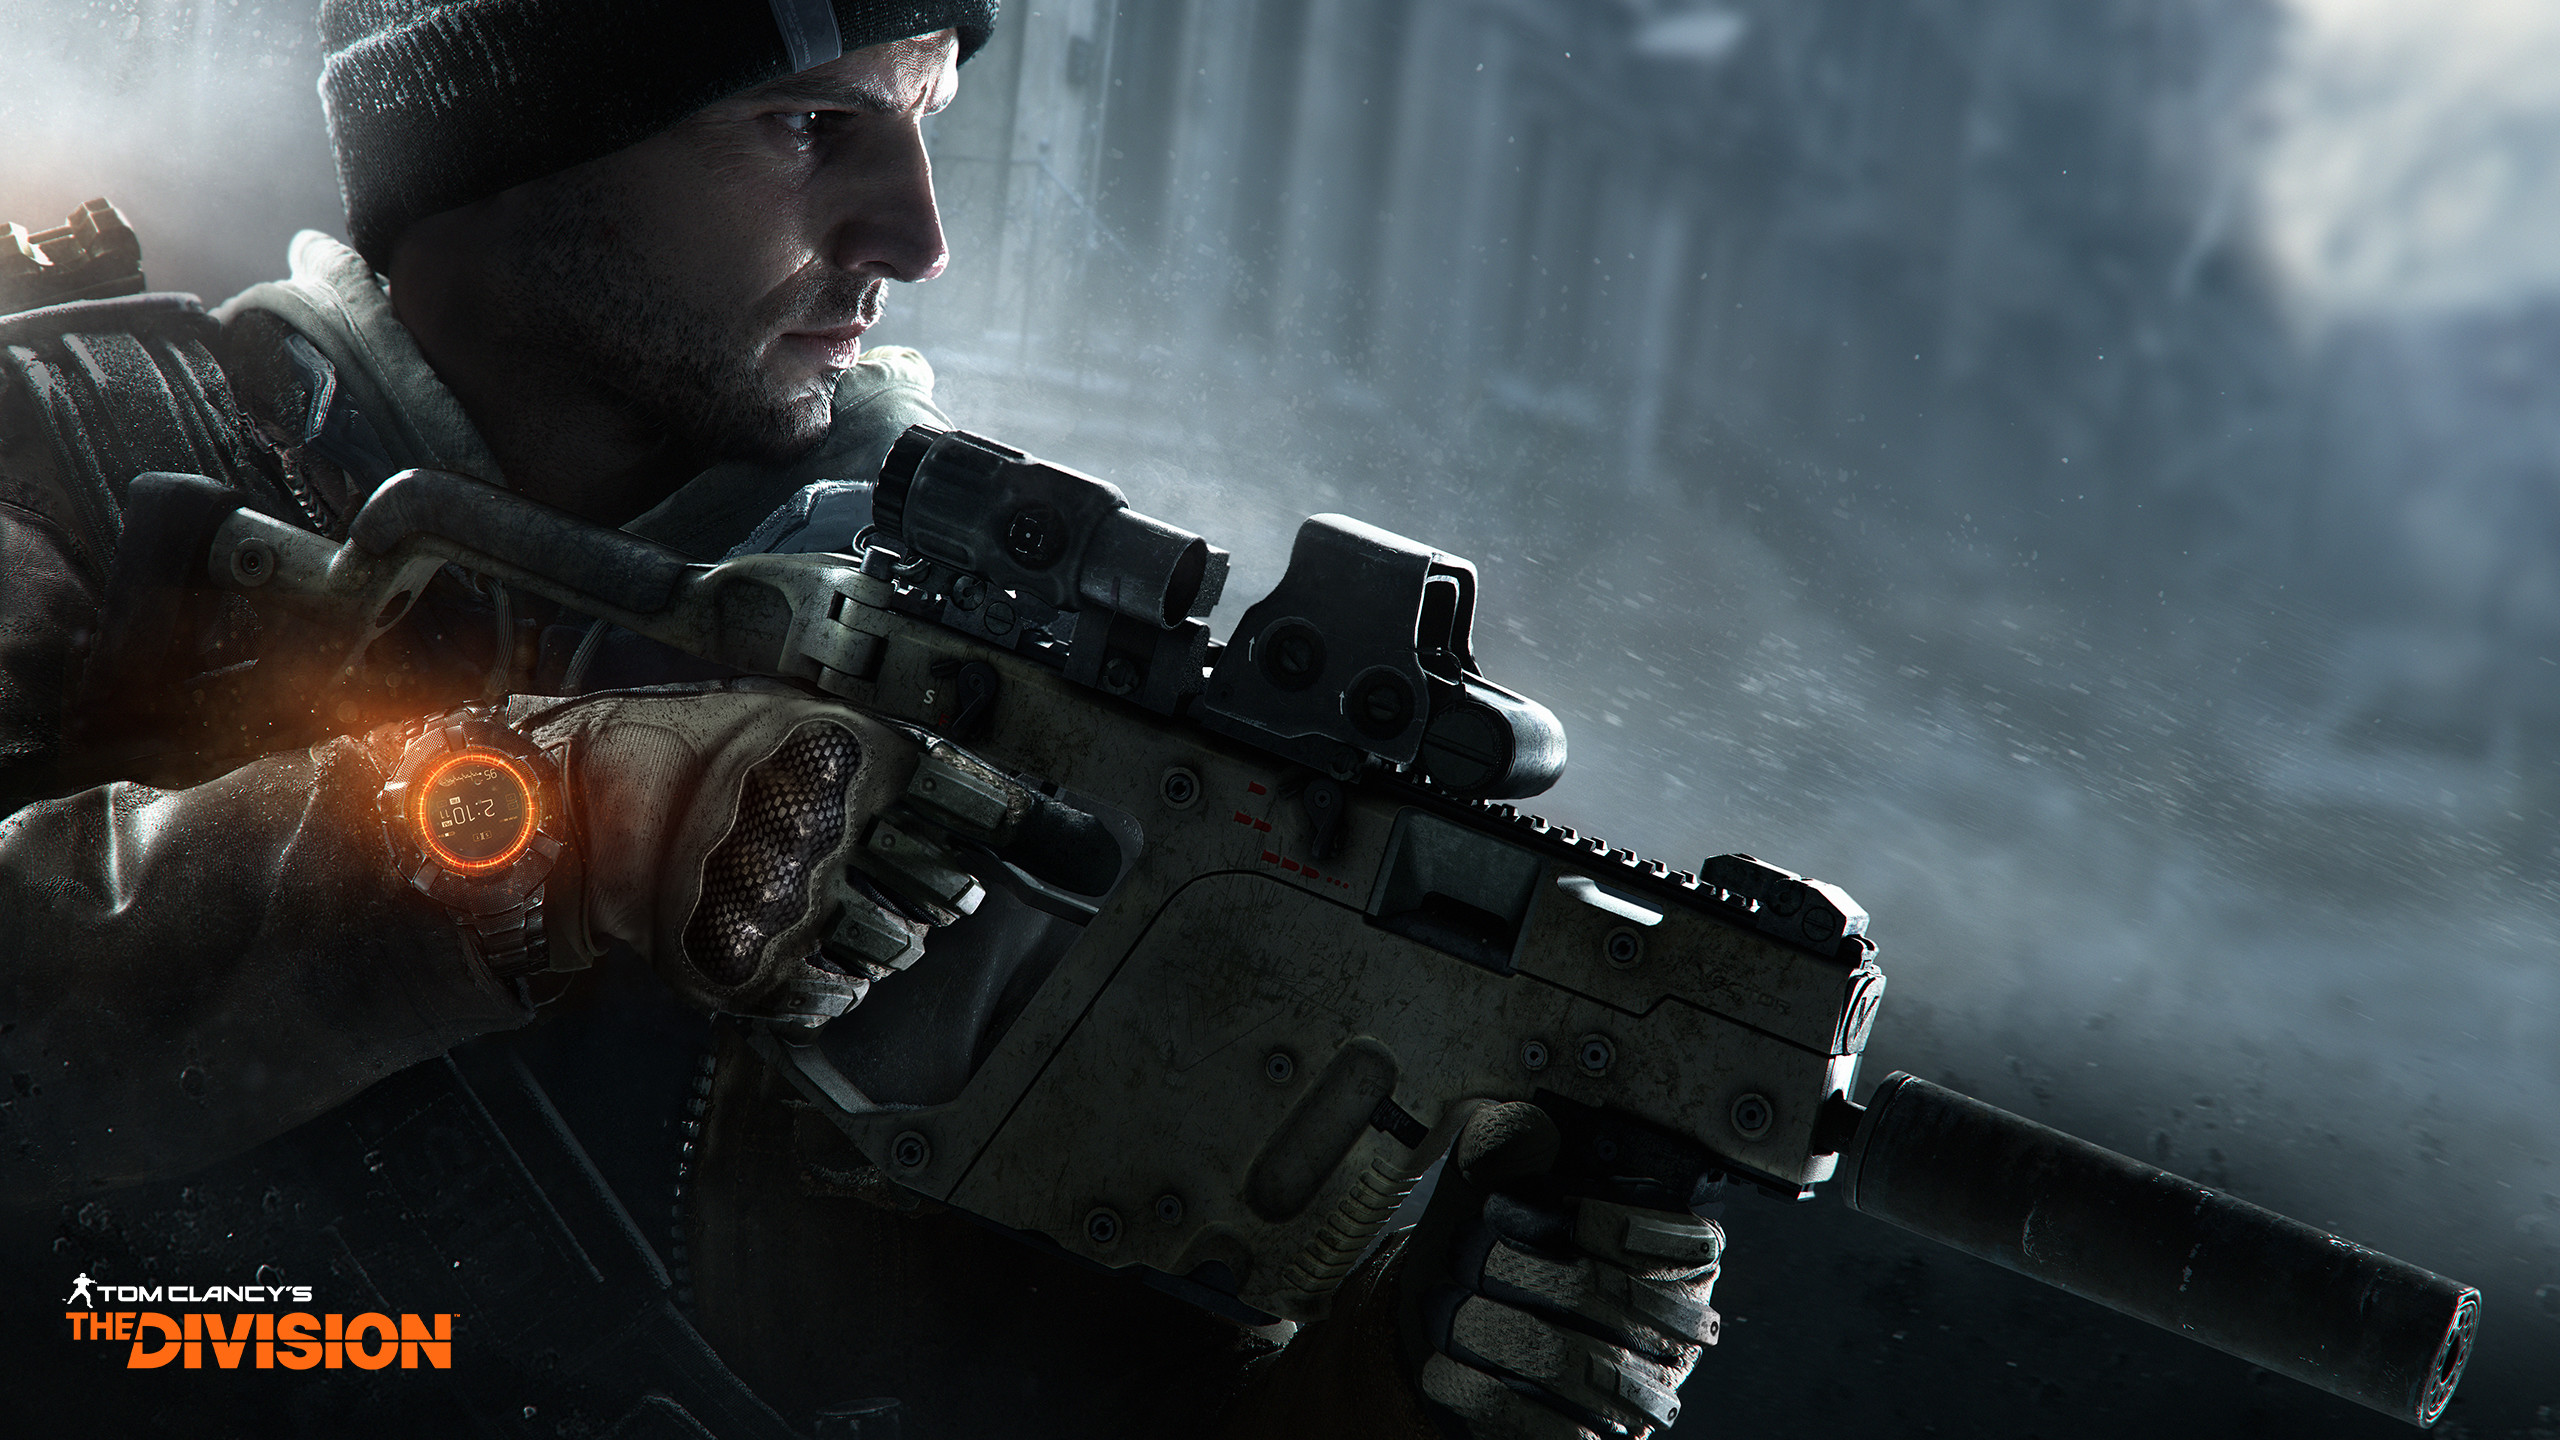 2560x1440 The Division Facebook Page Has Reached 1,000,000 Likes